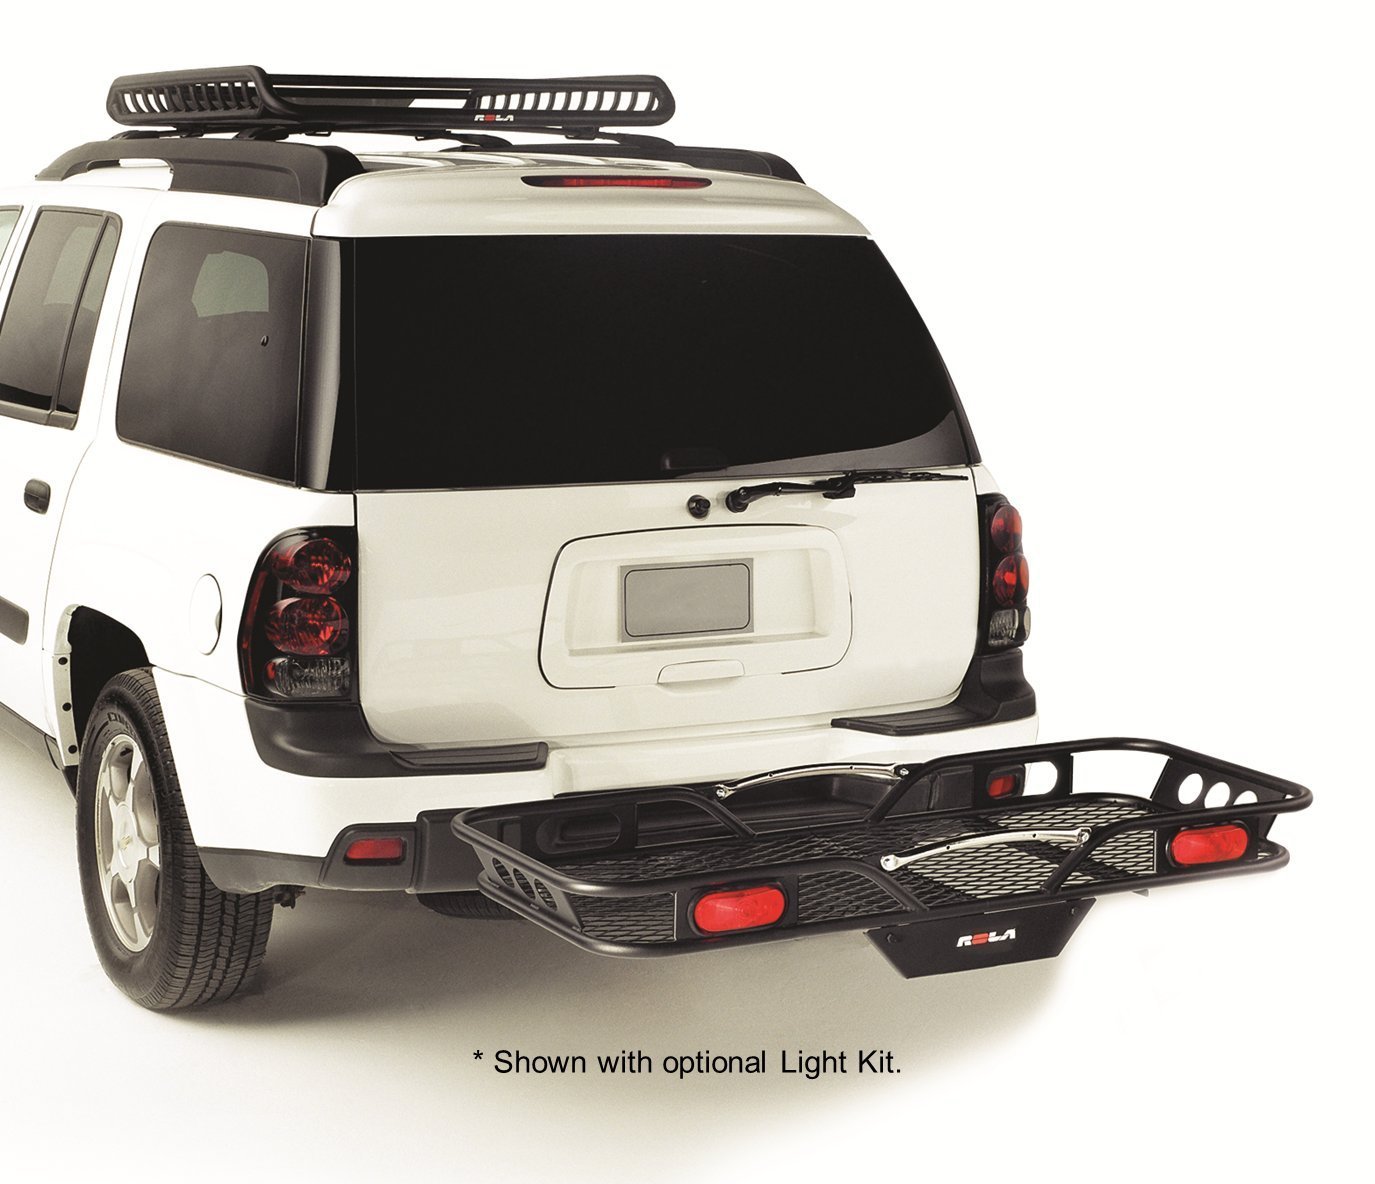 The Top 10 Best Hitch Cargo Carrier What Is The Best Hitch Cargo Carrier